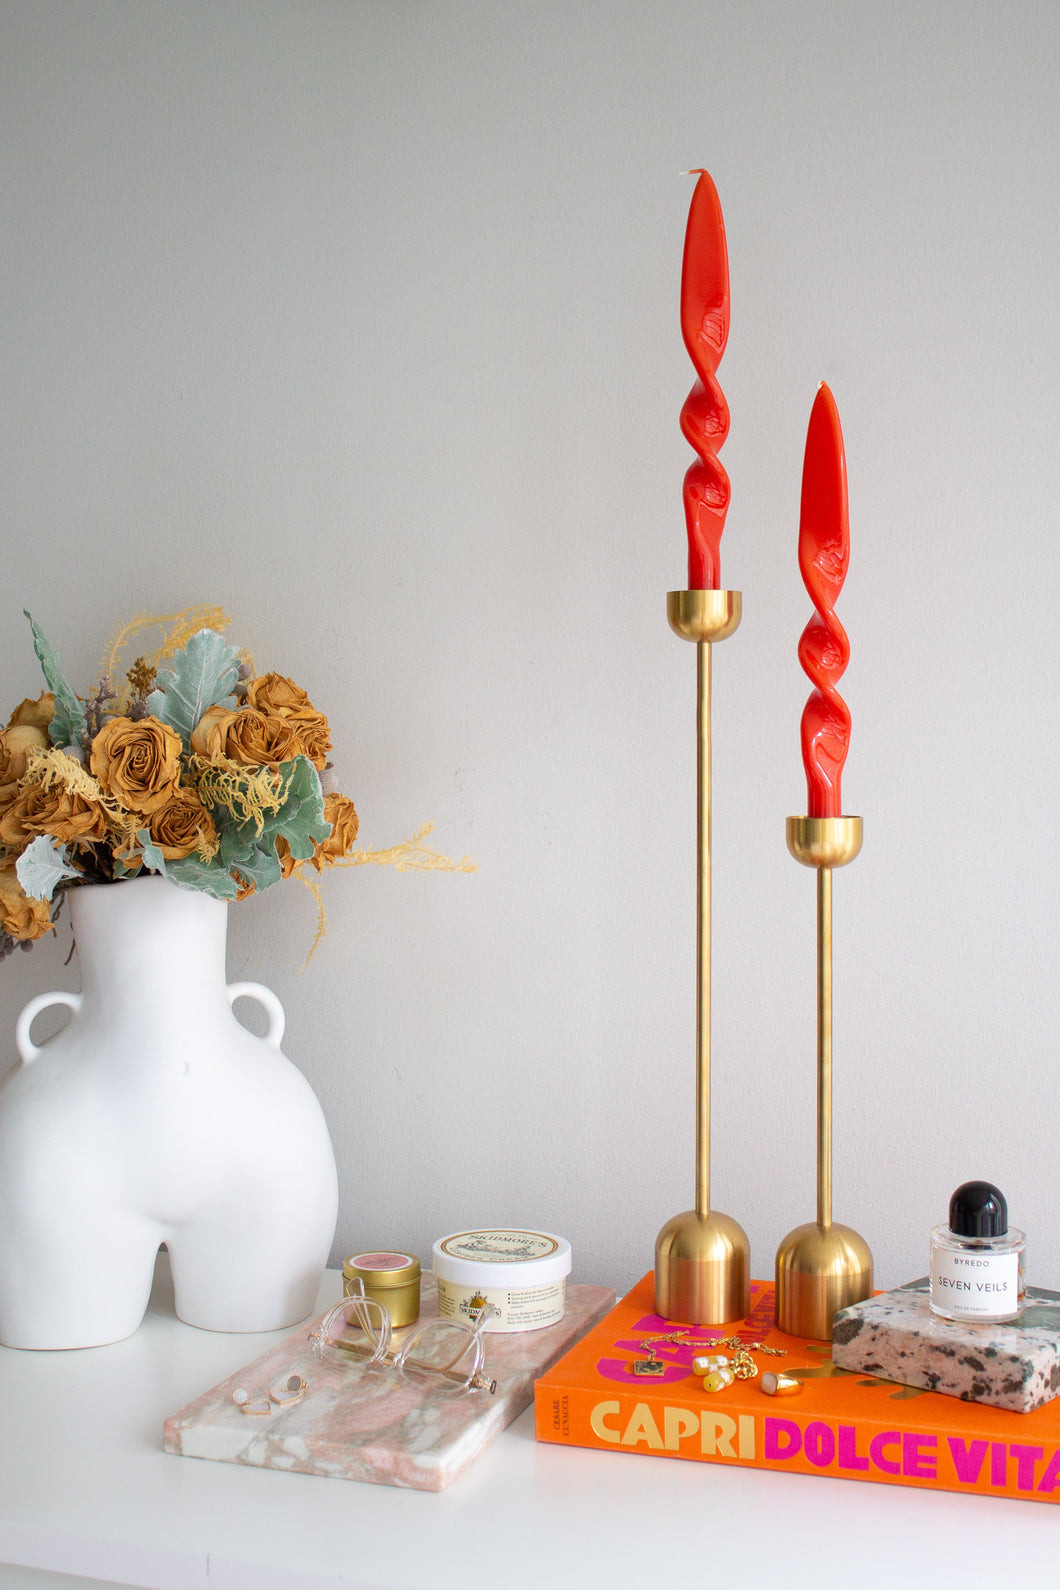 Taper Candle Set (Coral)